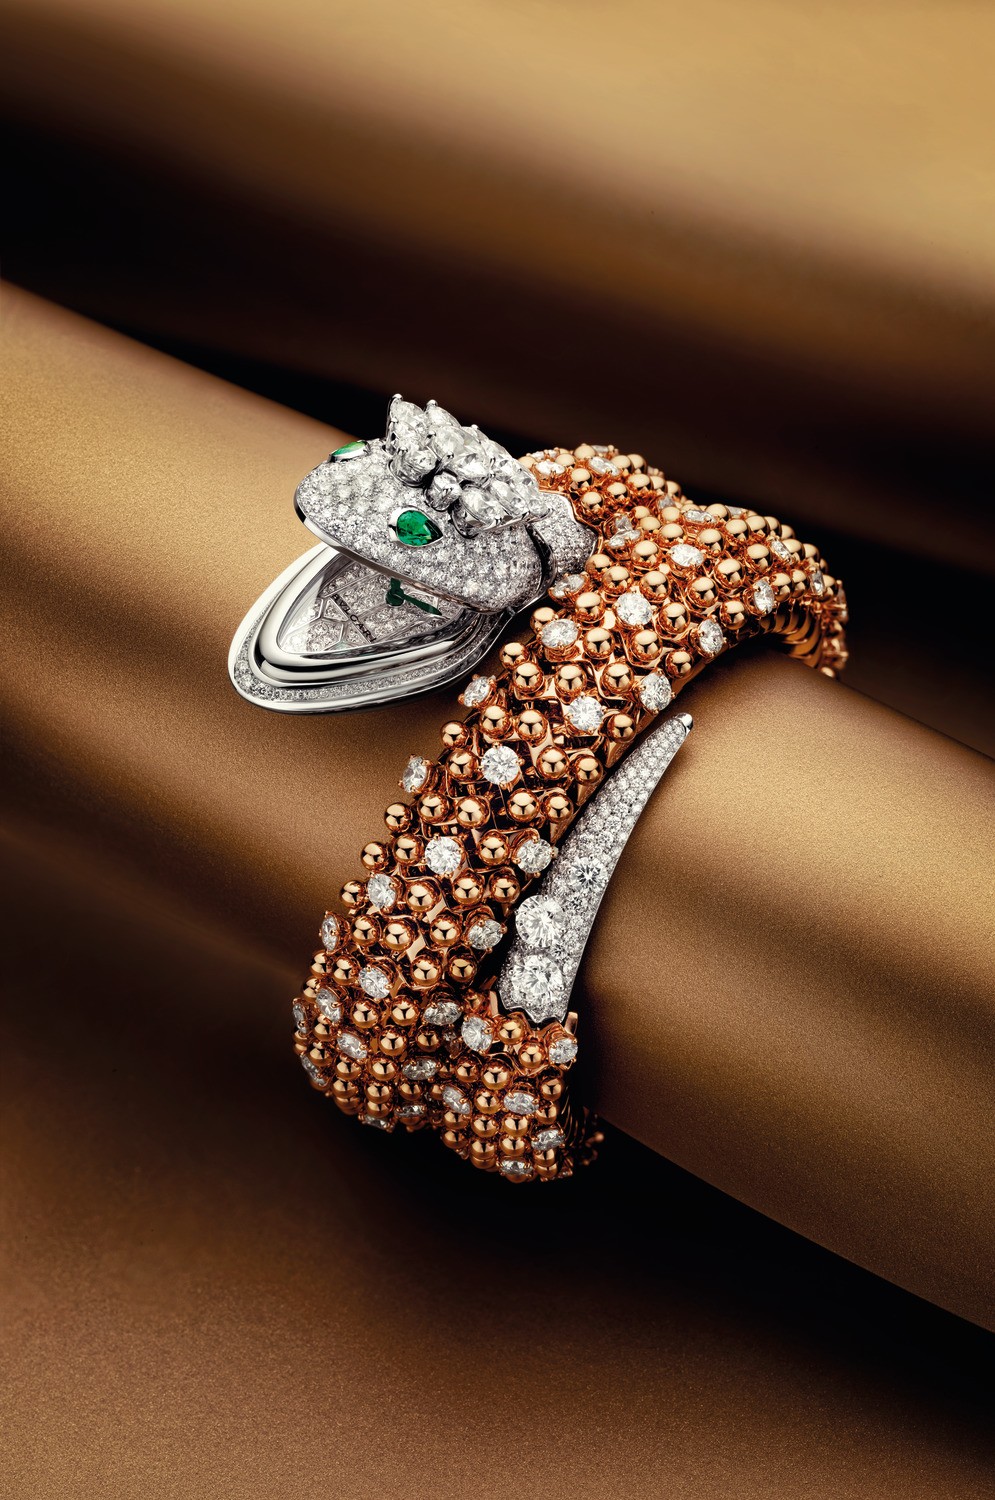 Bulgari High Jewellery Serpenti watch, with an 18-ct rose gold bracelet, was inspired by the creative excitement of the 1980s.